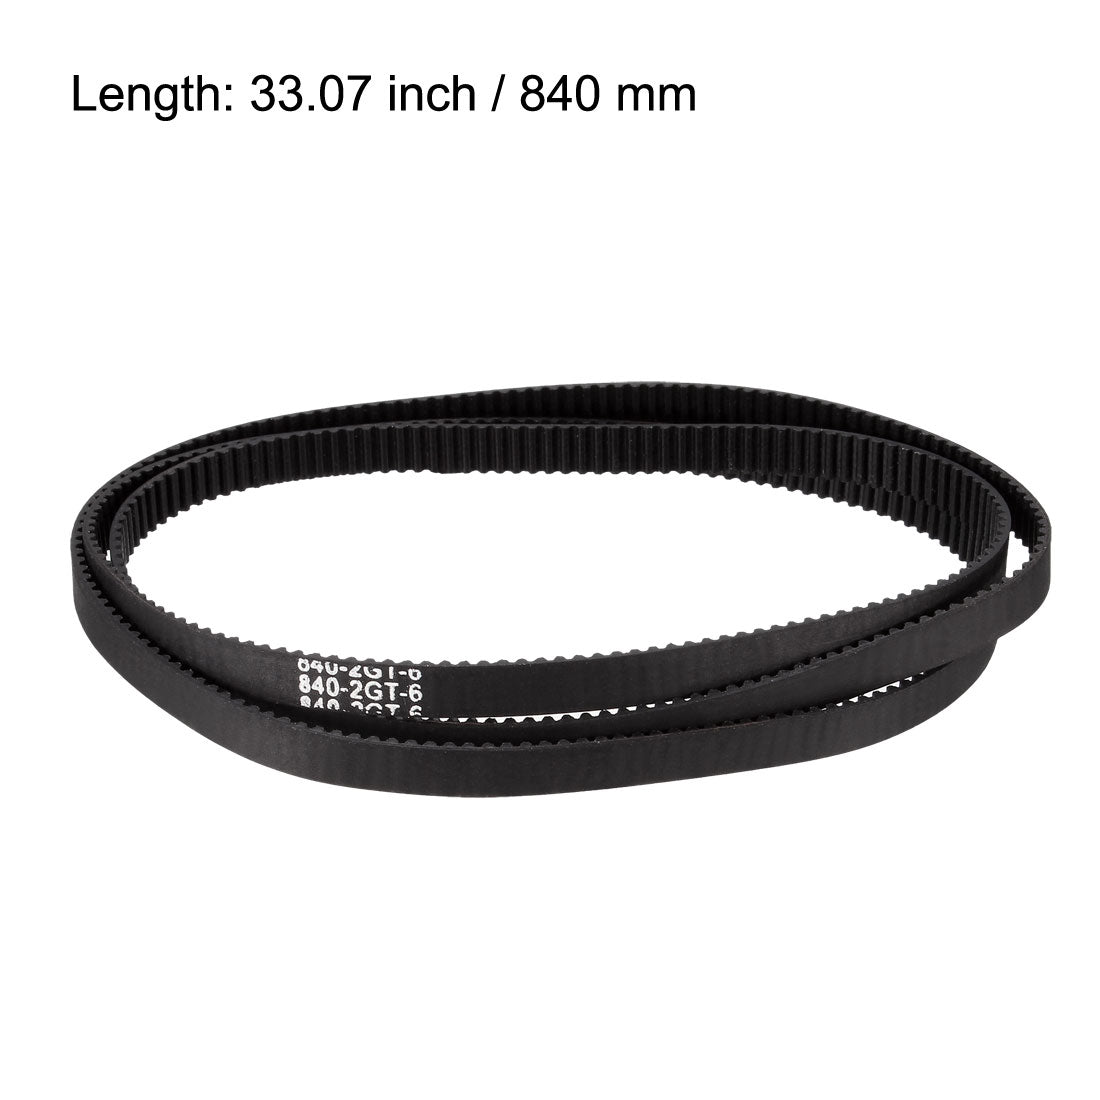 uxcell Uxcell Timing Belt 840mm Closed Fit Synchronous Wheel for 3D Printer